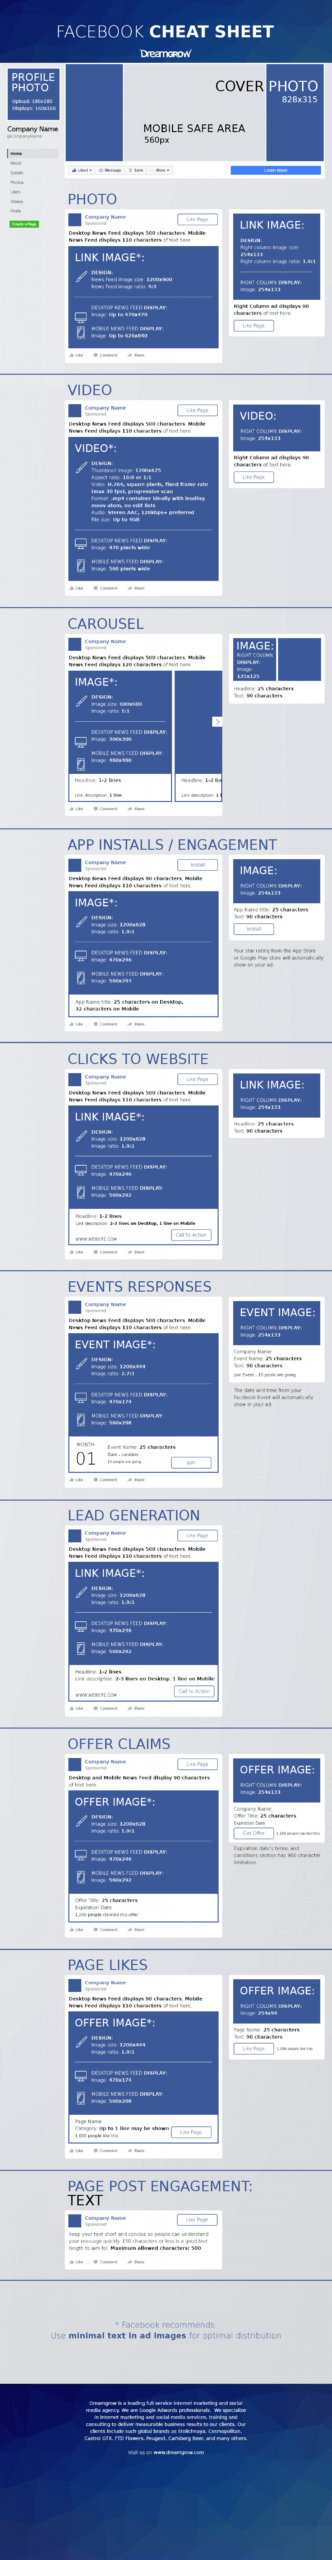 008 Template Ideas Facebook Cheat Sheet Main Profile Intended For Html5 Blank Page Template